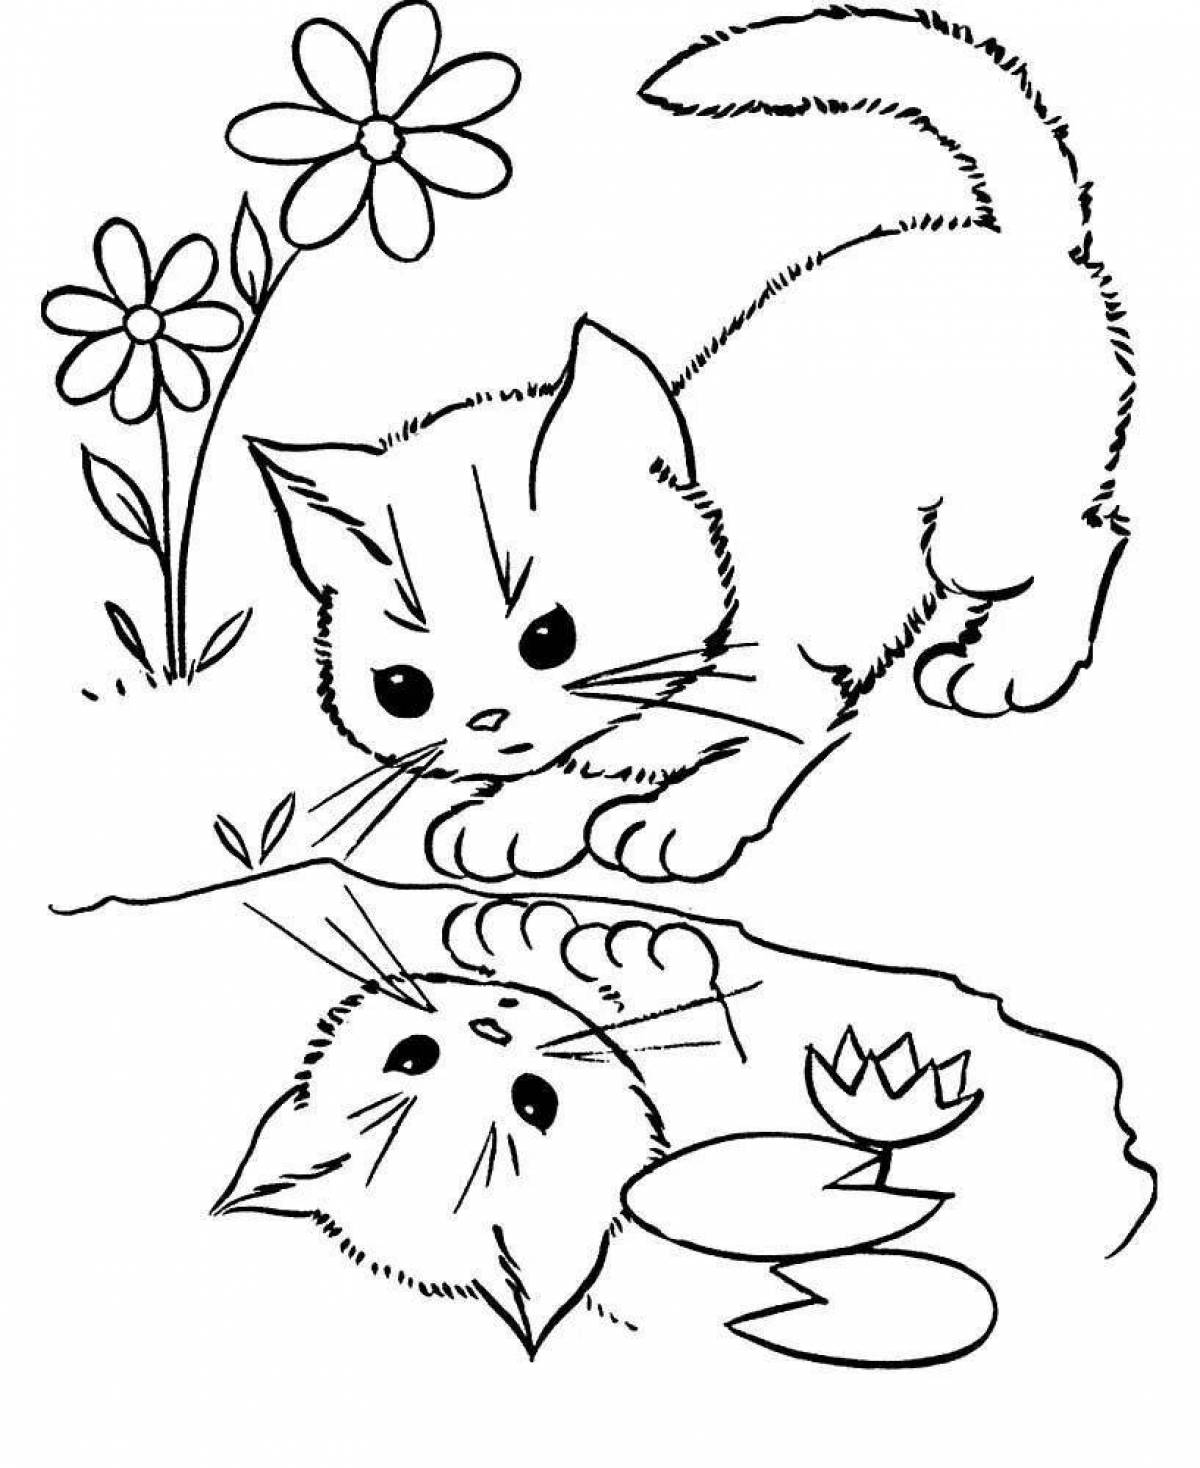 Furry kitty coloring book